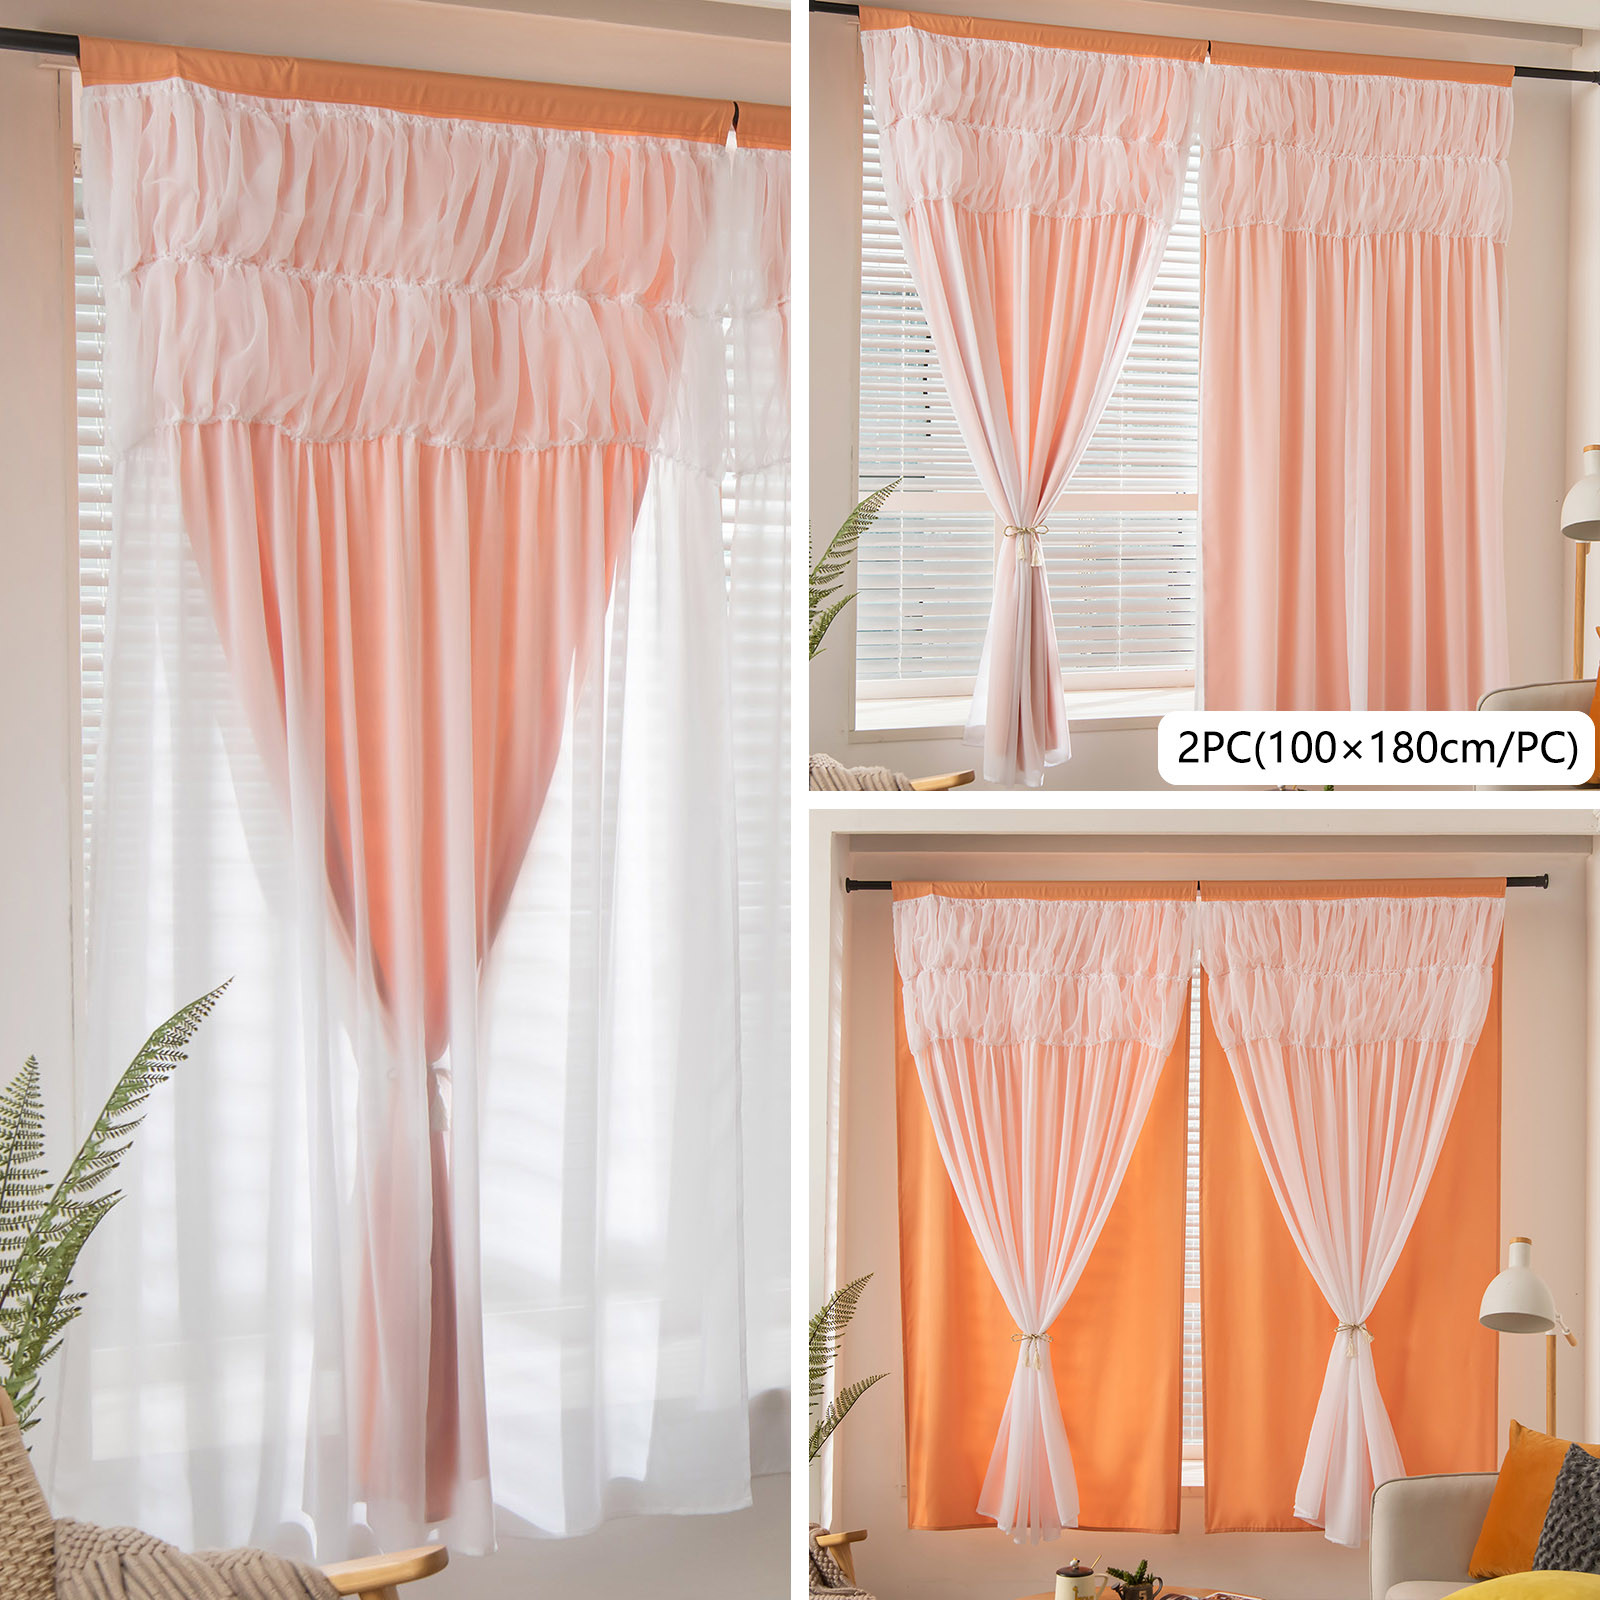 Curtain Short Length Cold Curtains 2 Panels Home Curtains Layered Solid Plain Panels And Sheer Sheer Curtains Window Curtain Panels 39"" Wide Curtains for Windows 66 to 120 Curtains Rose - image 2 of 9